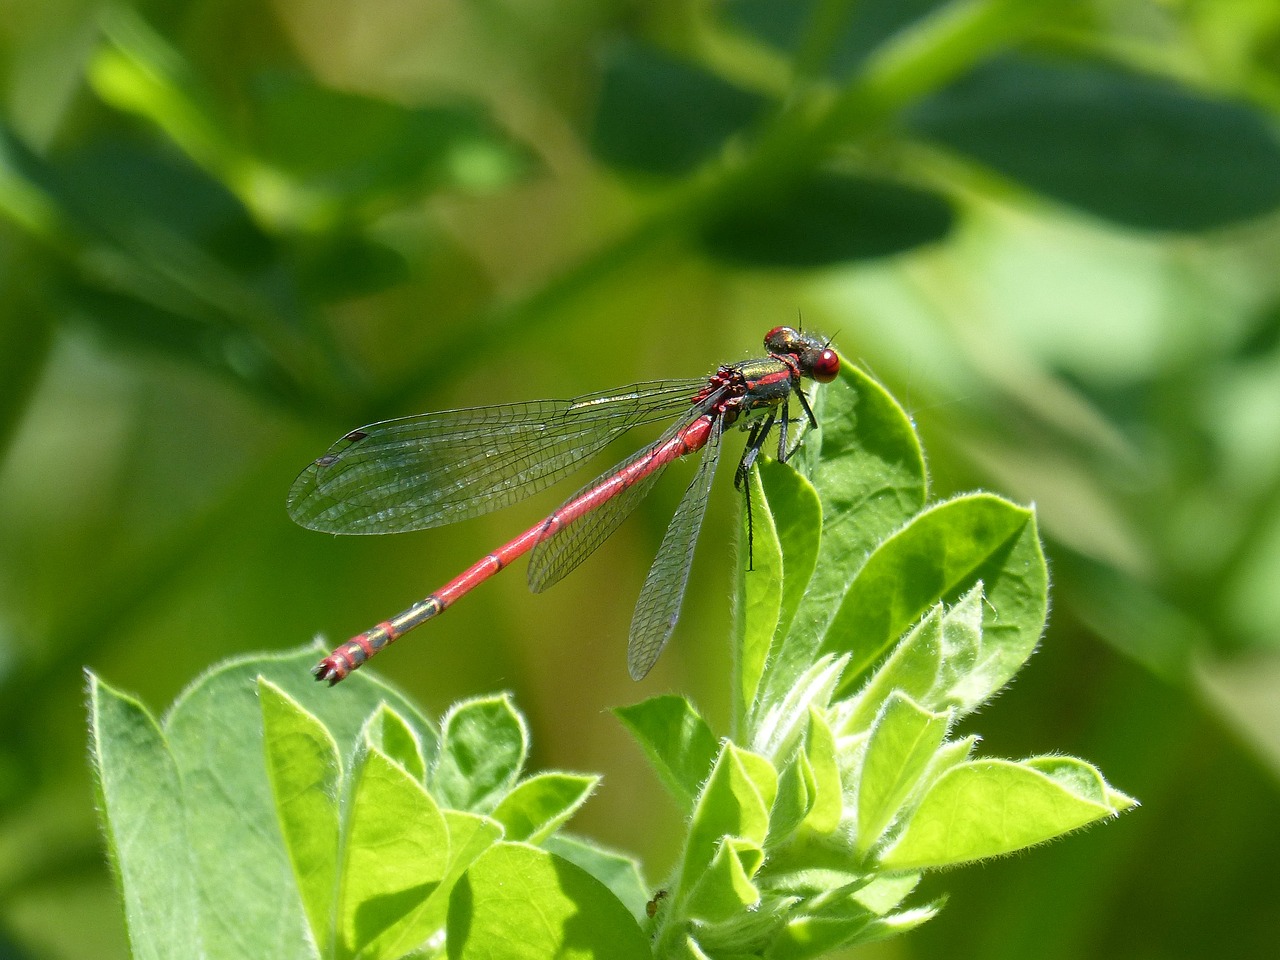 dragonfly leaves red dragonfly free photo